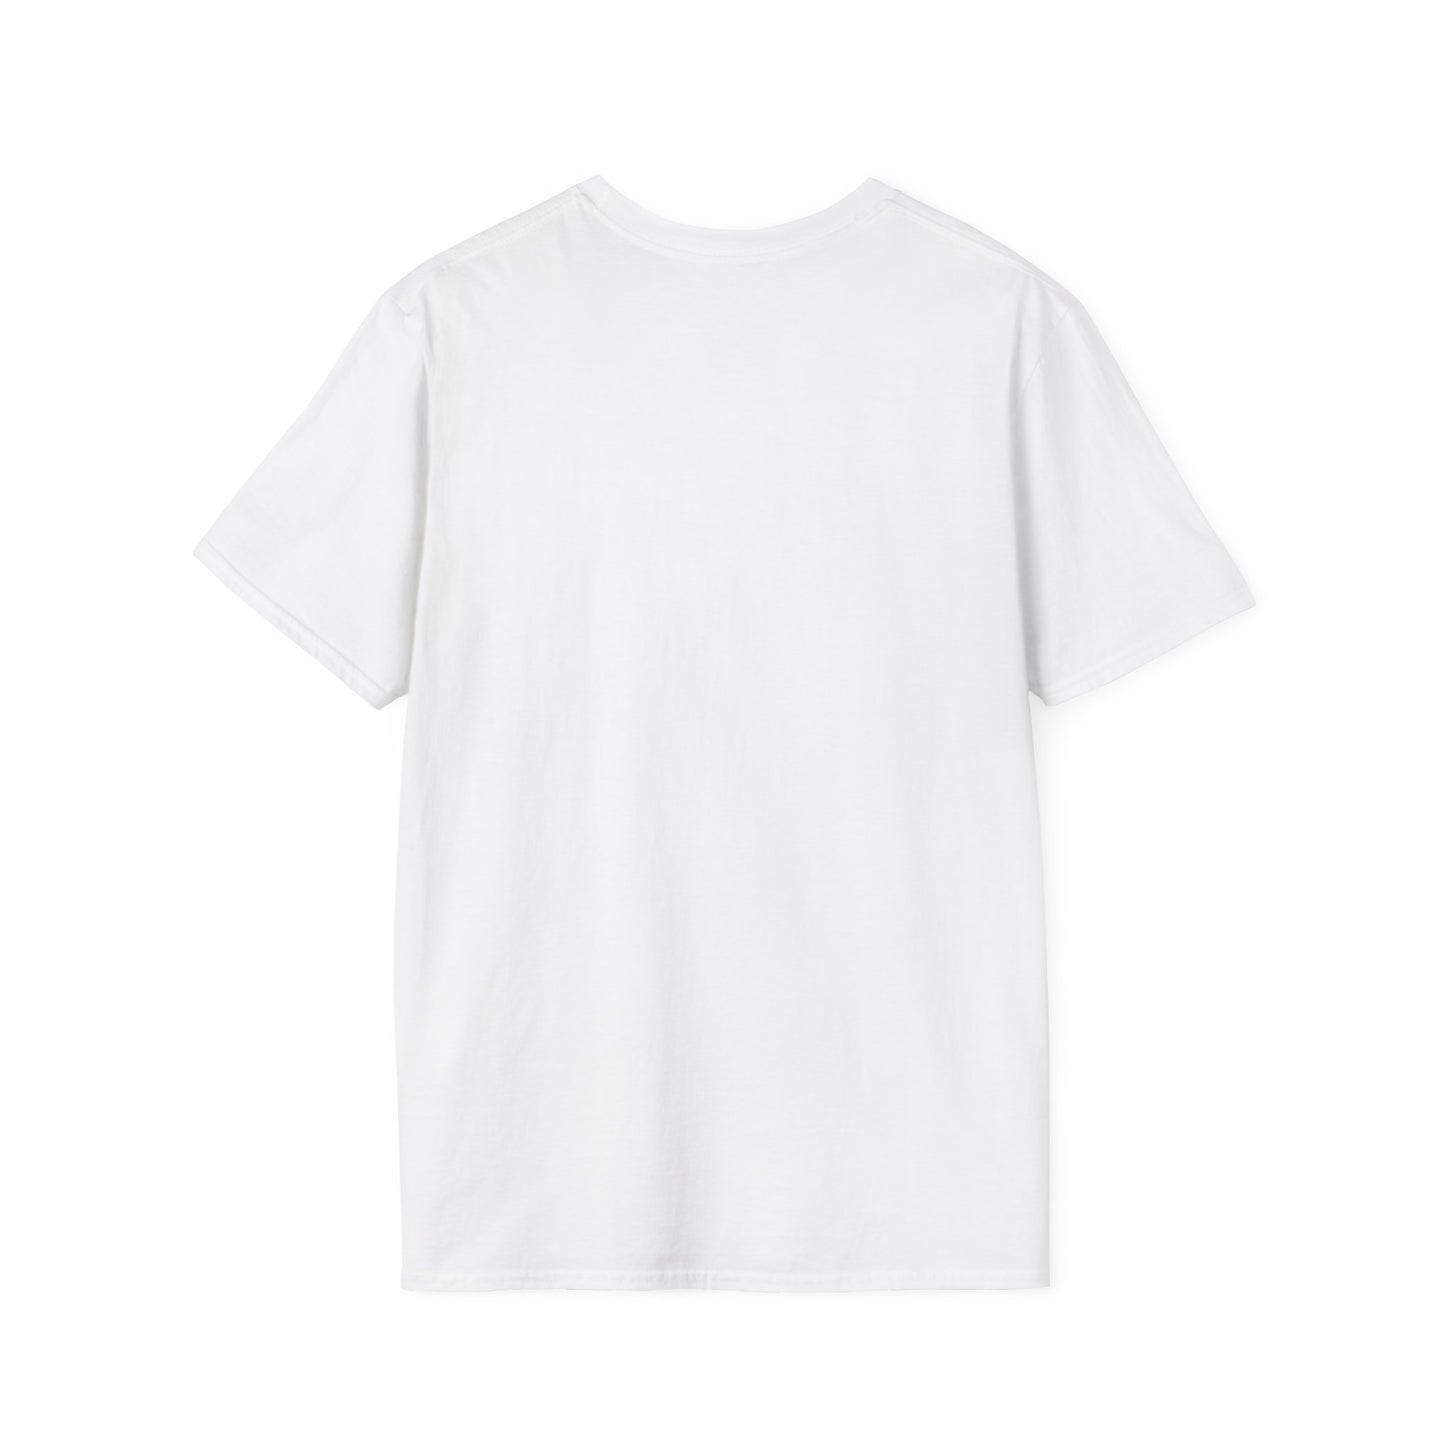 Yielded To... Unisex Softstyle T-Shirt